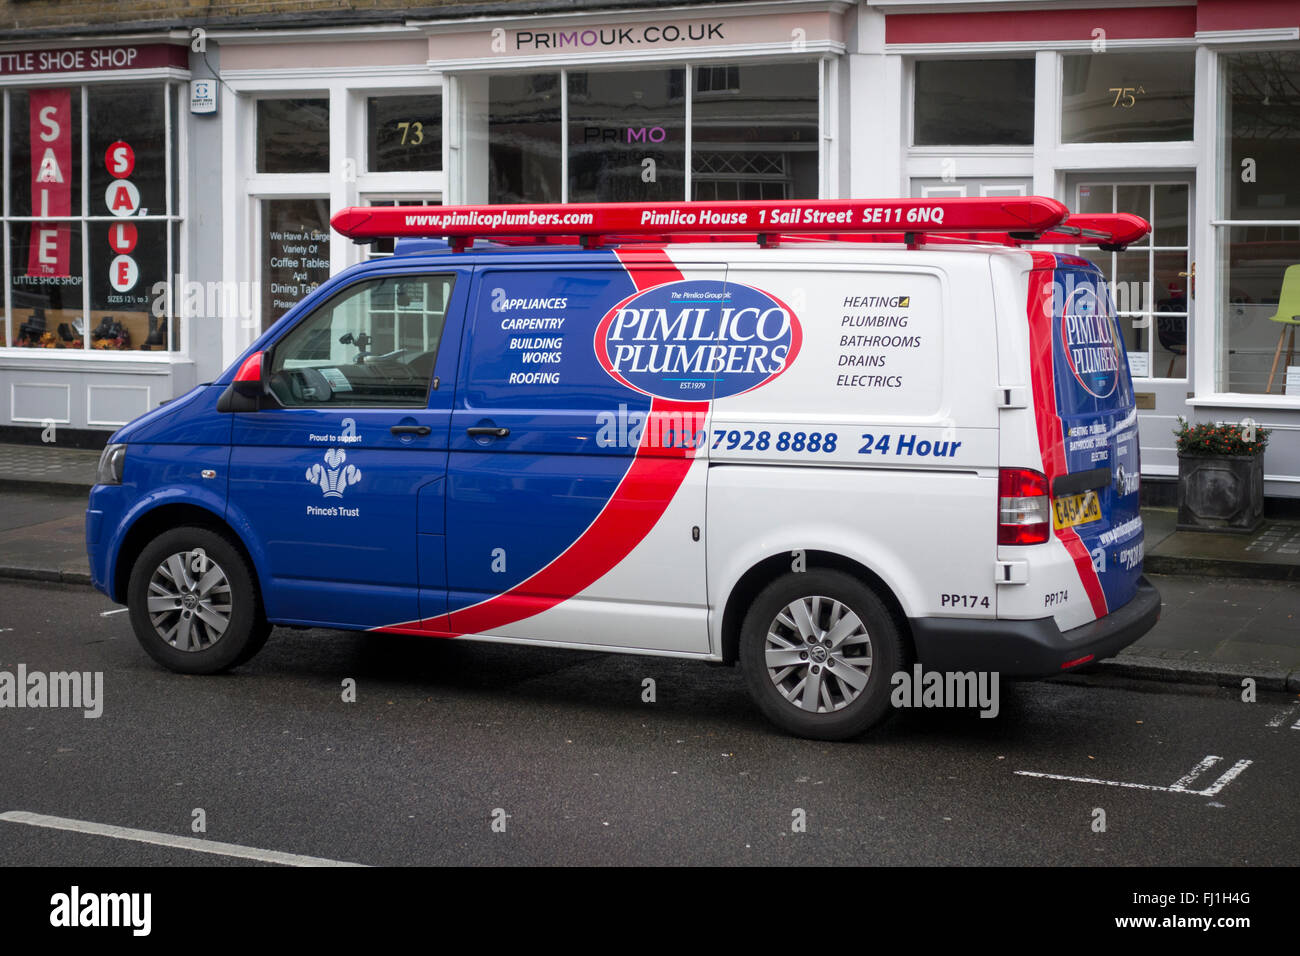 Plumber Van High Resolution Stock Photography and Images - Alamy